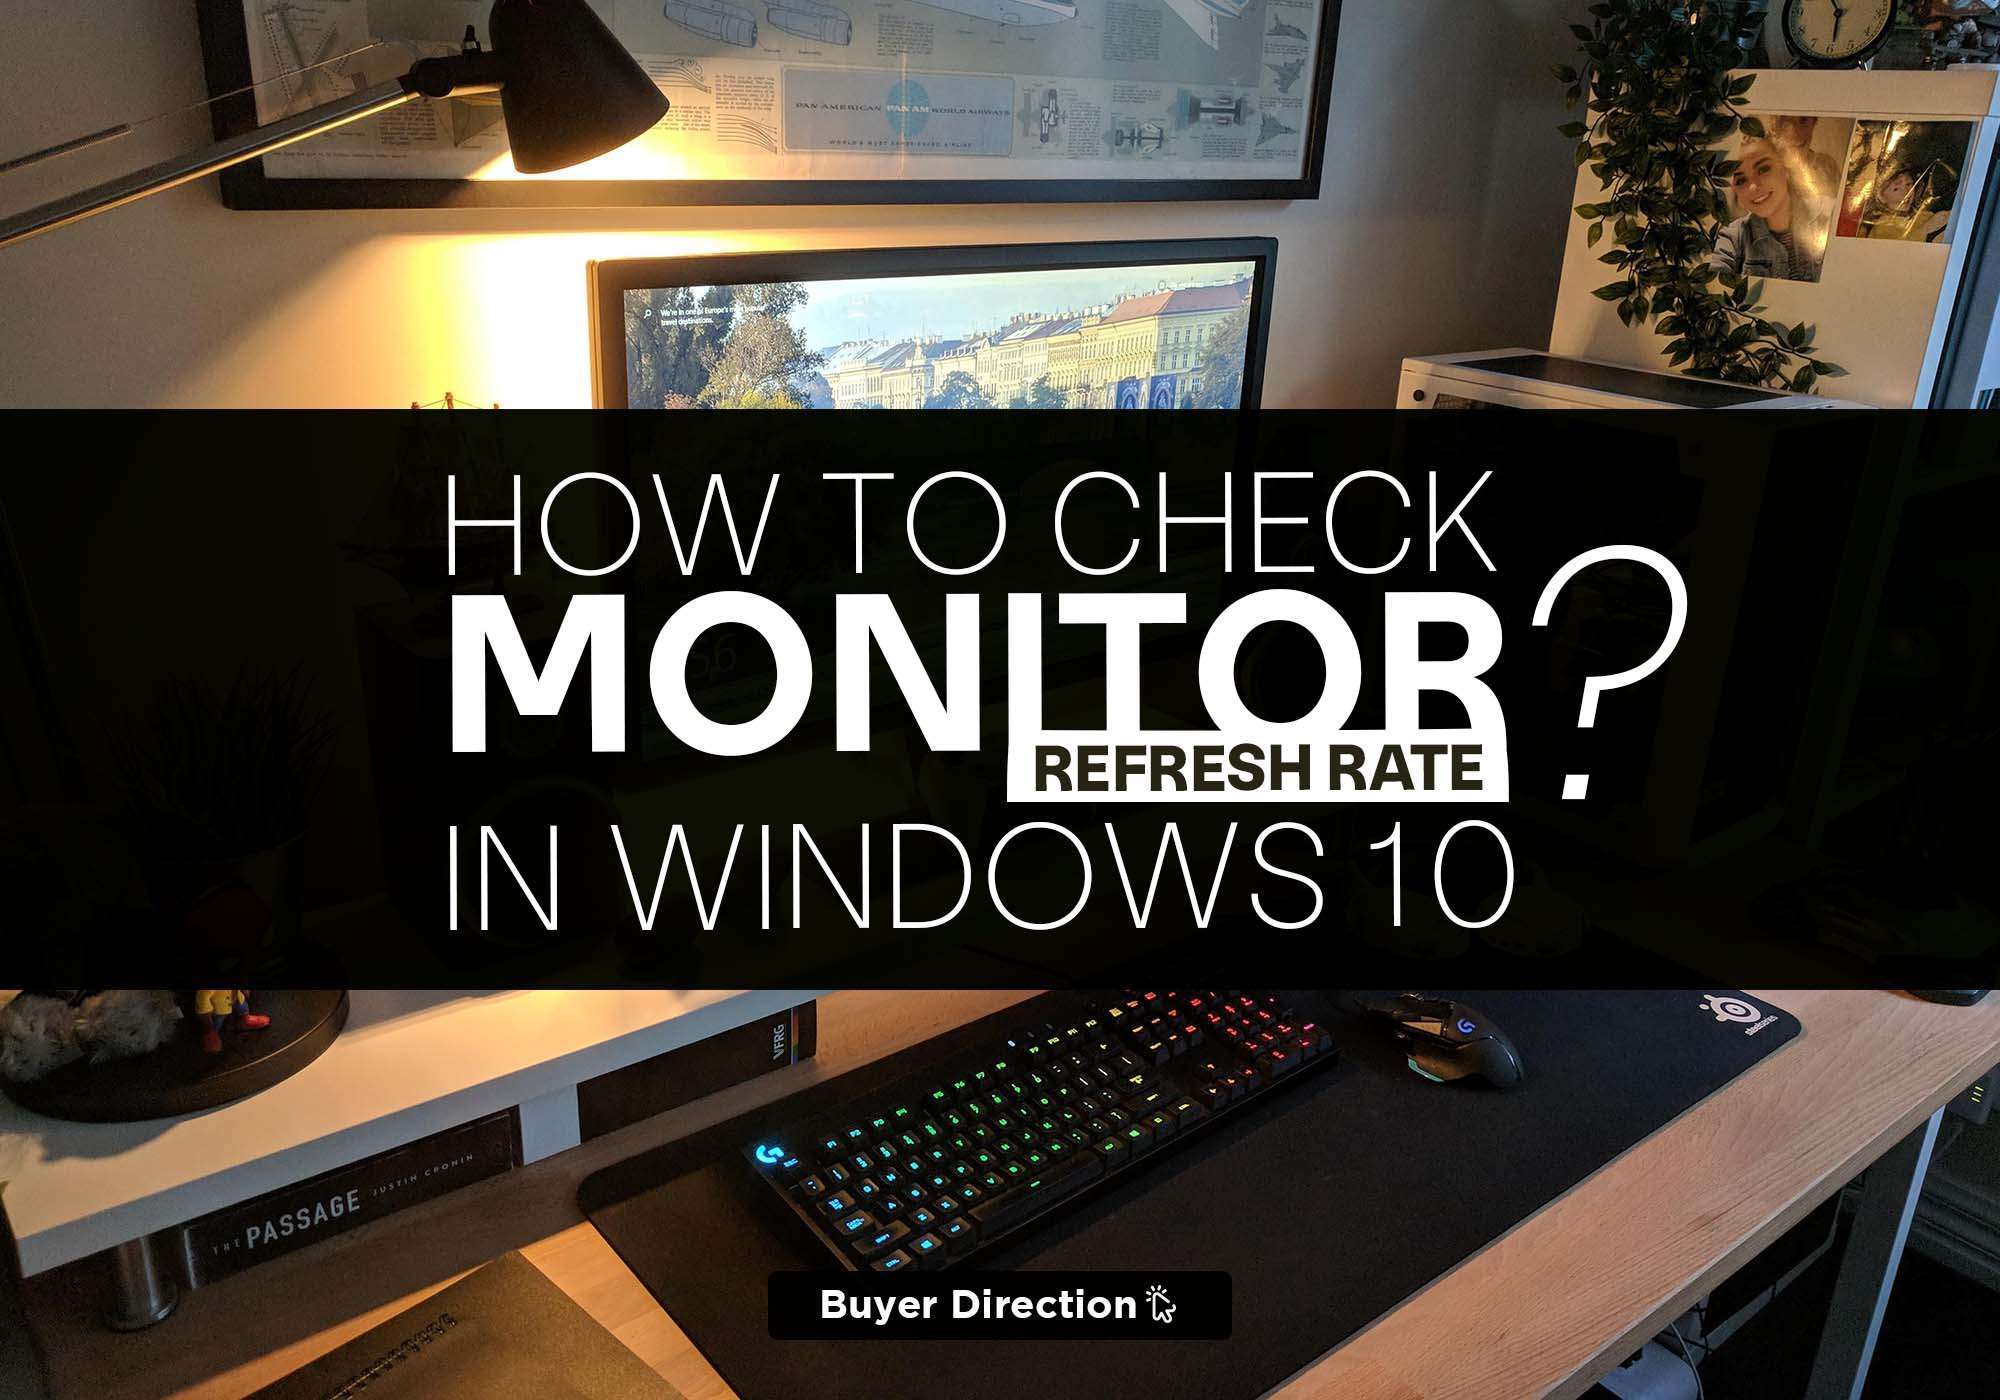 How To Check Monitor Refresh Rate Windows 10?